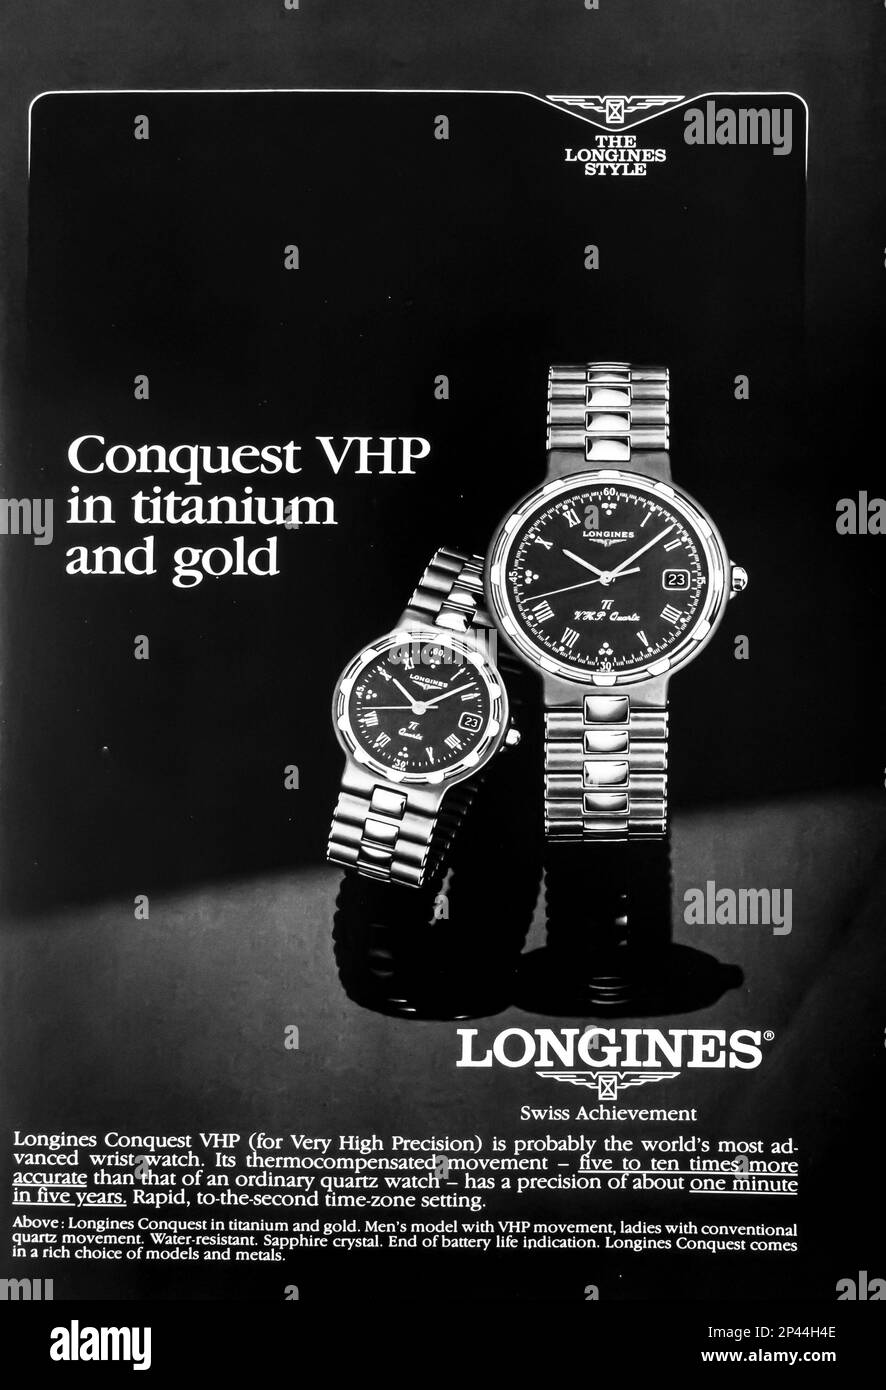 Longines Conquest VHP advert in a Natgeo magazine May 1988 Stock Photo